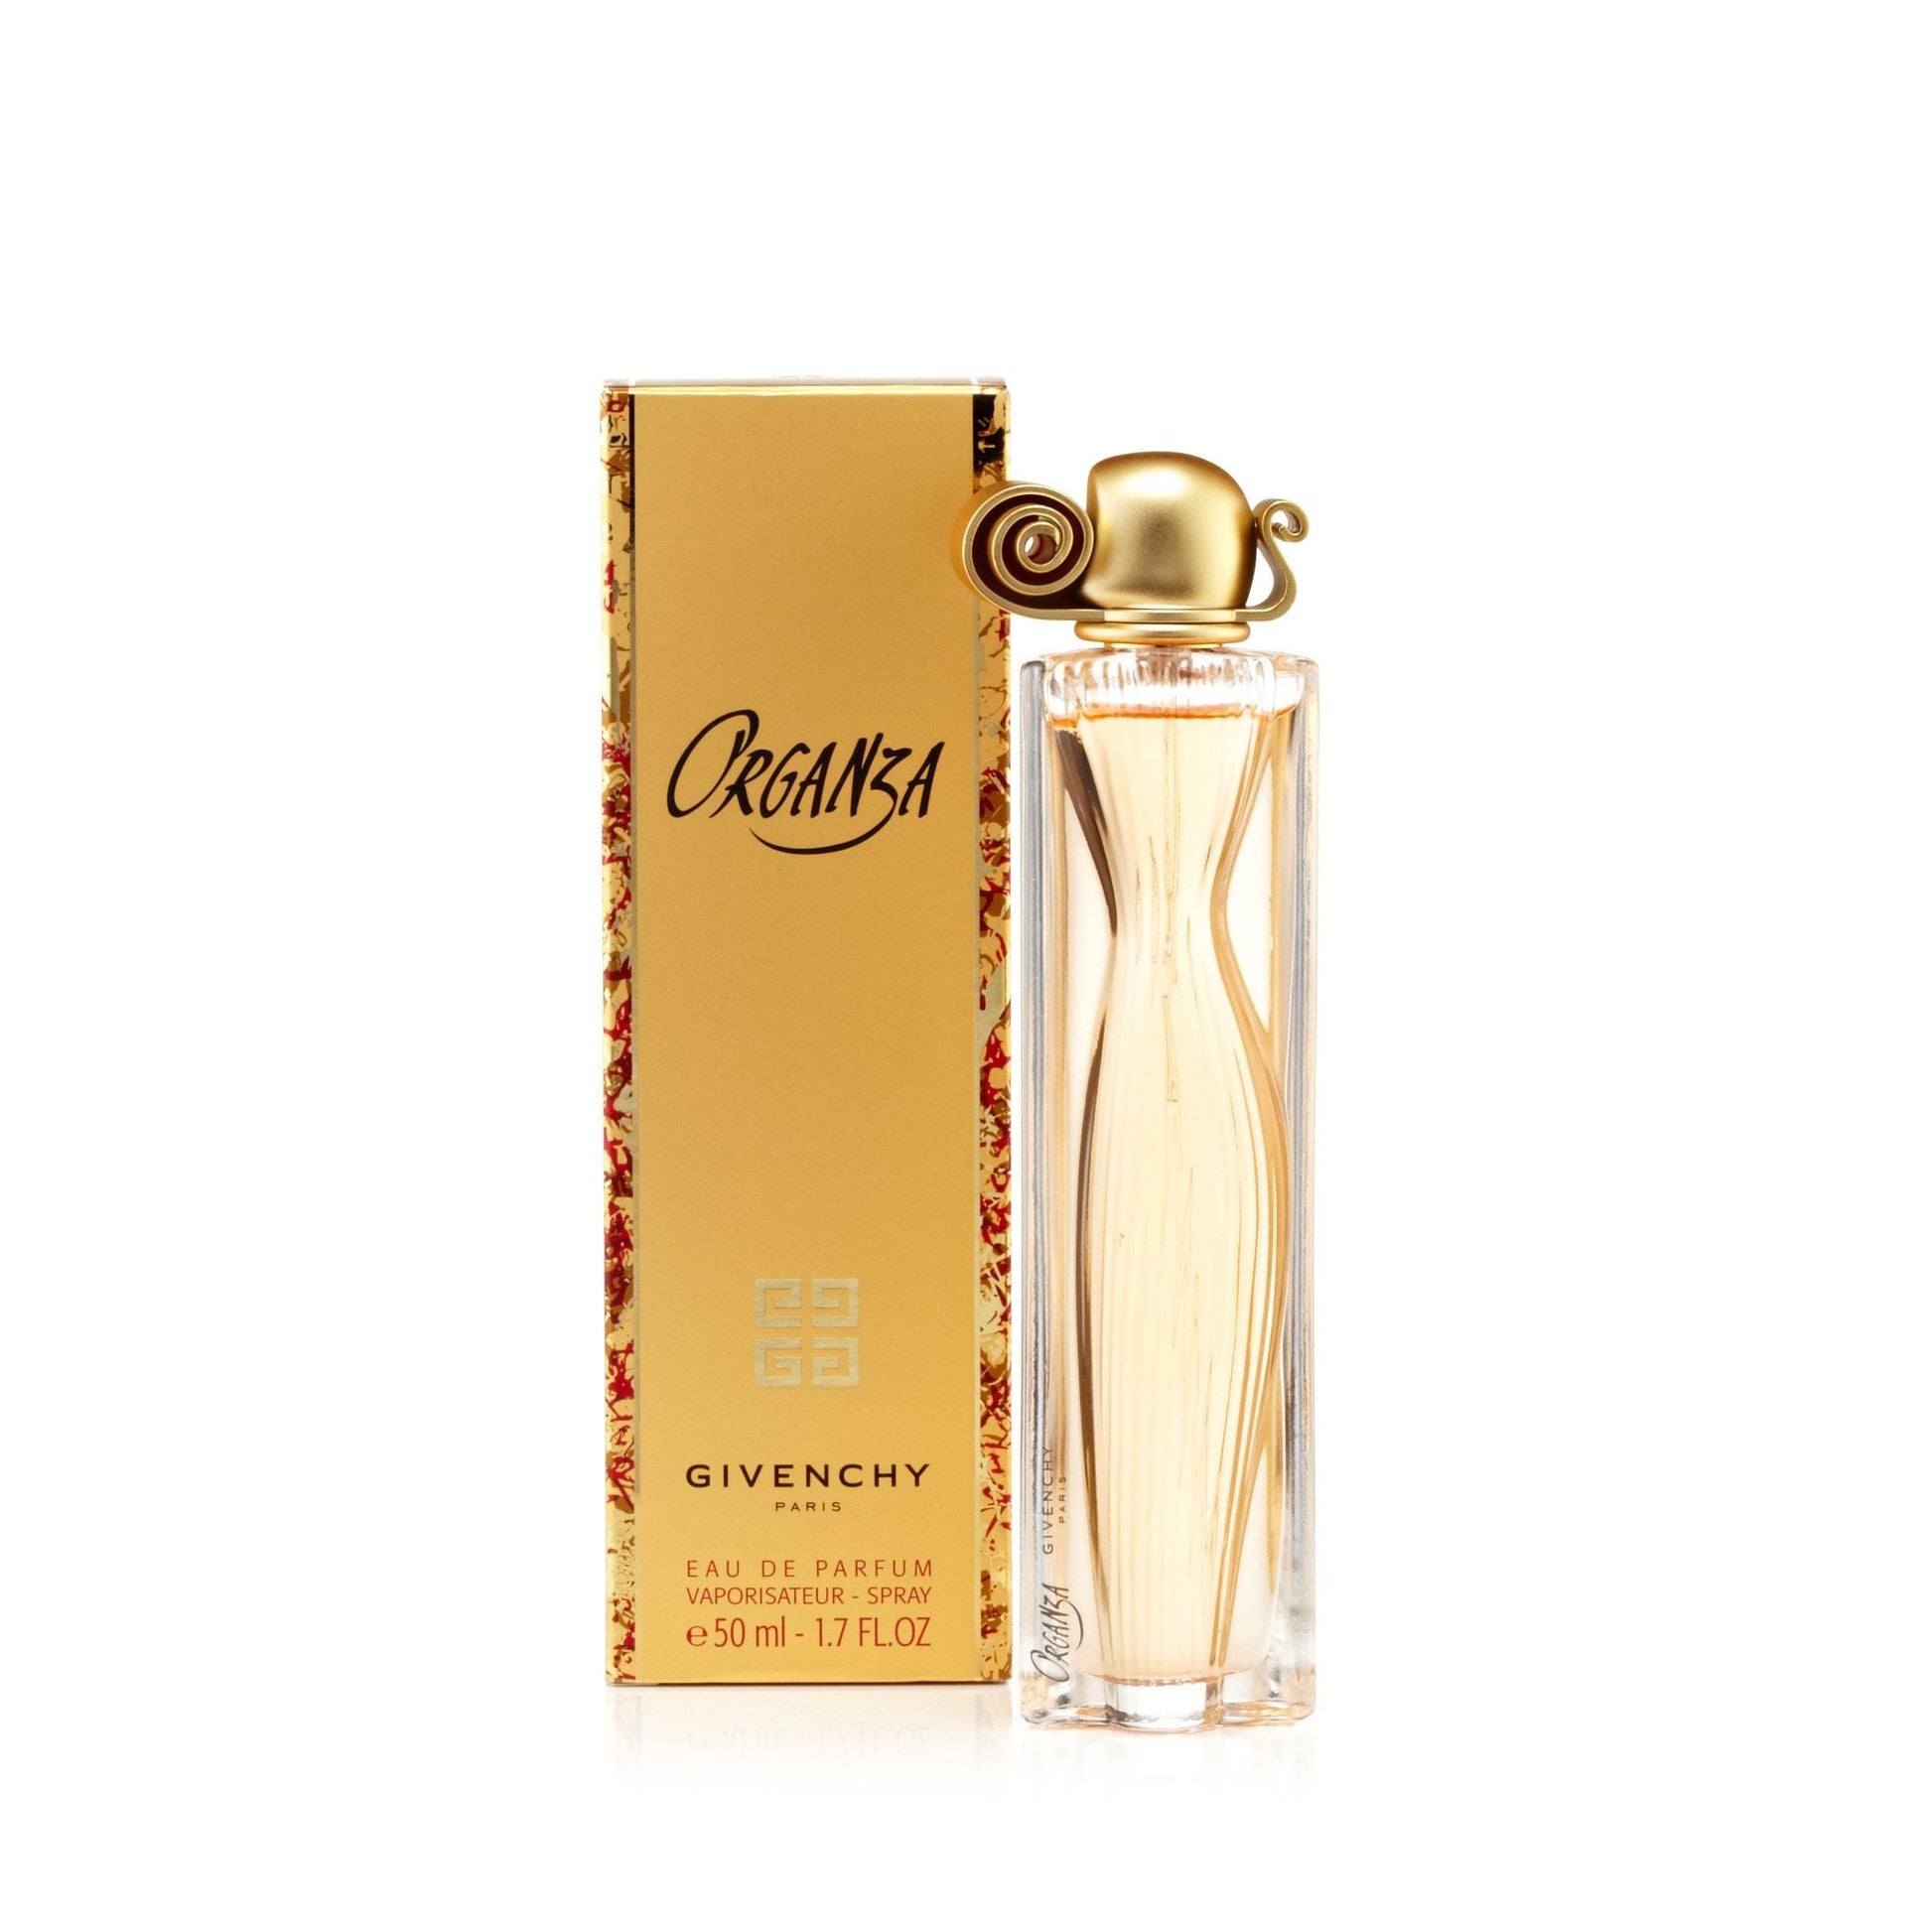 Organza Eau de Parfum Spray for Women by Givenchy, Product image 1